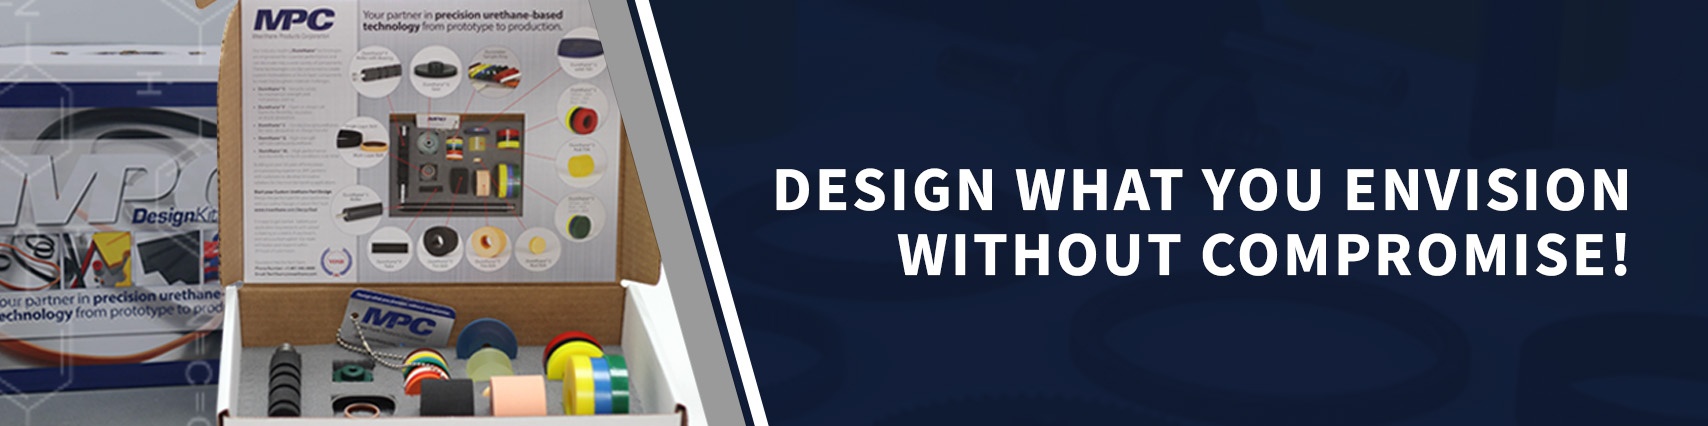 Design what you envision, without compromise!